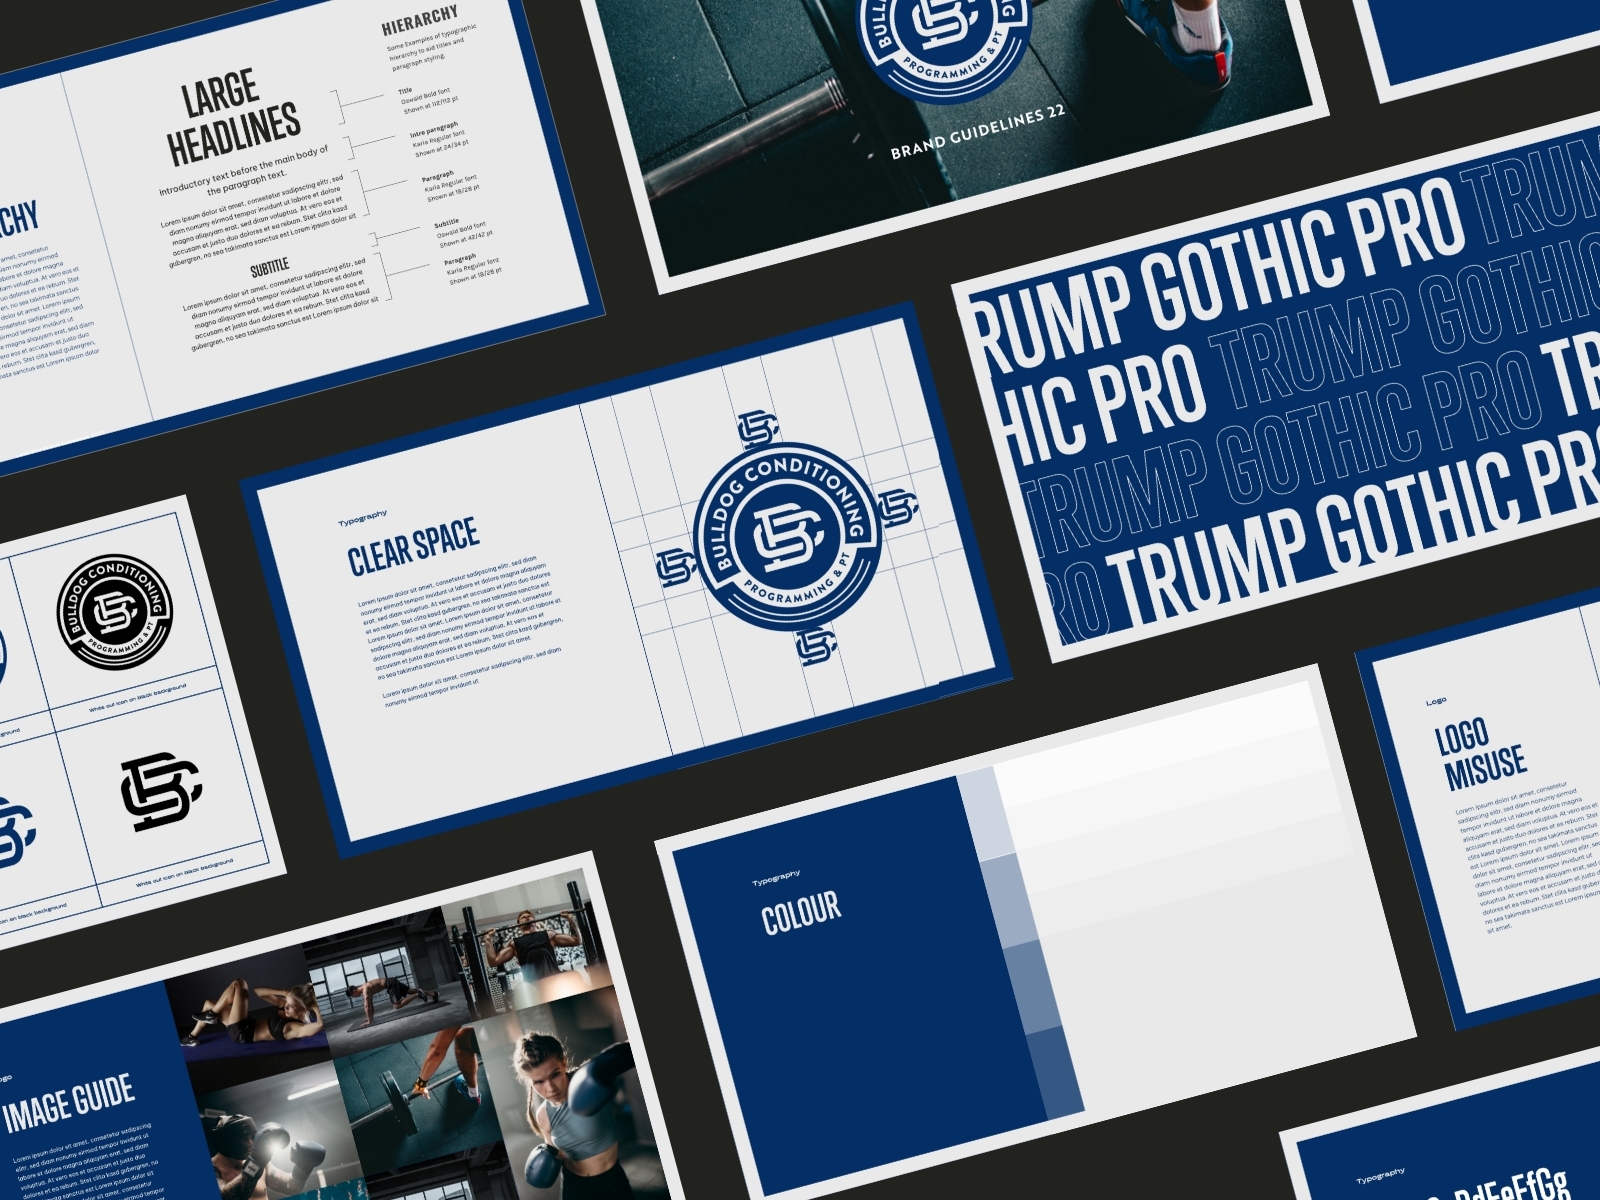 Bulldog Conditioning brand guidelines